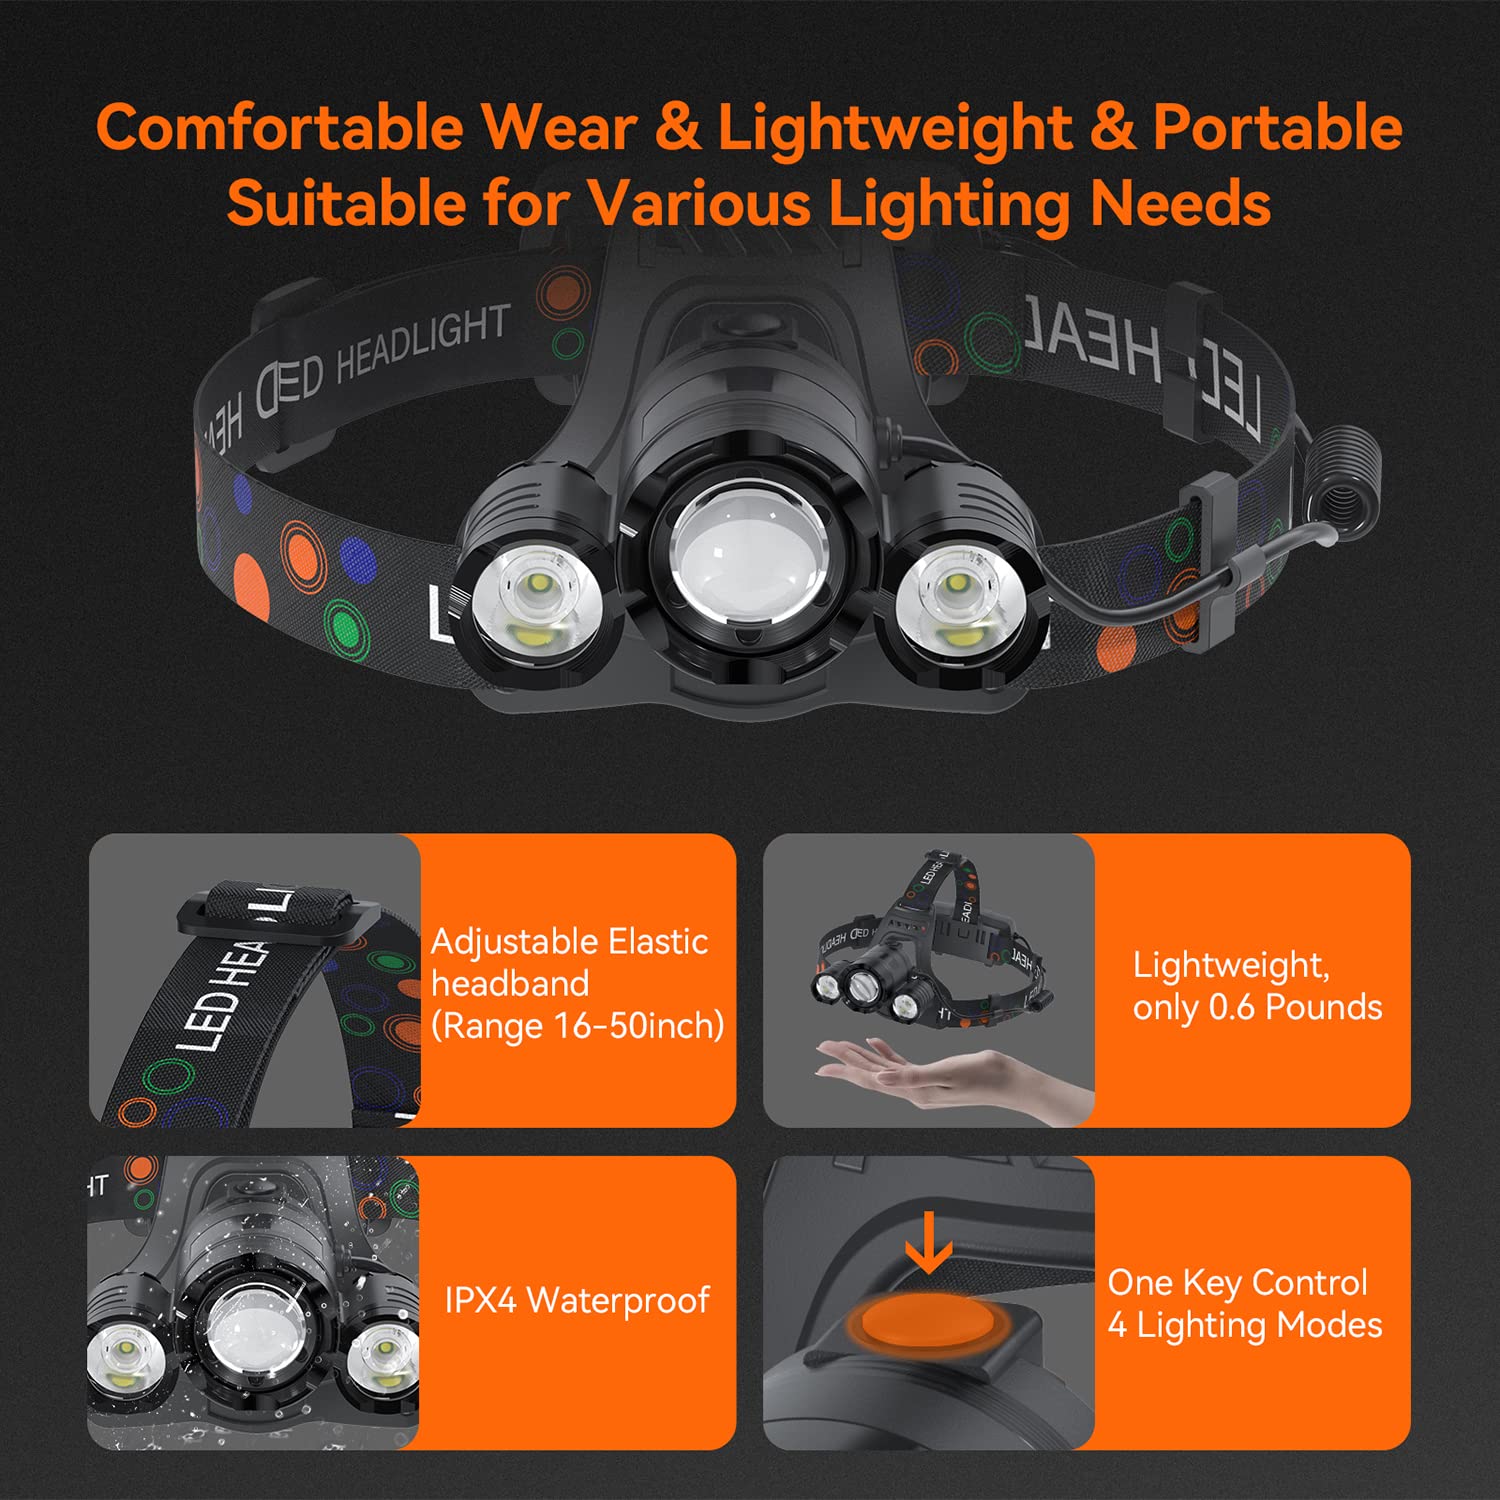 Headlamp Rechargeable USB Headlamps 6000 High Lumens Super Brightest Head Lamp for Adults Kids Waterproof Headlight 4 Modes Lightweight Head Lights for Outdoor Camping Hunting Running Hiking（Black）